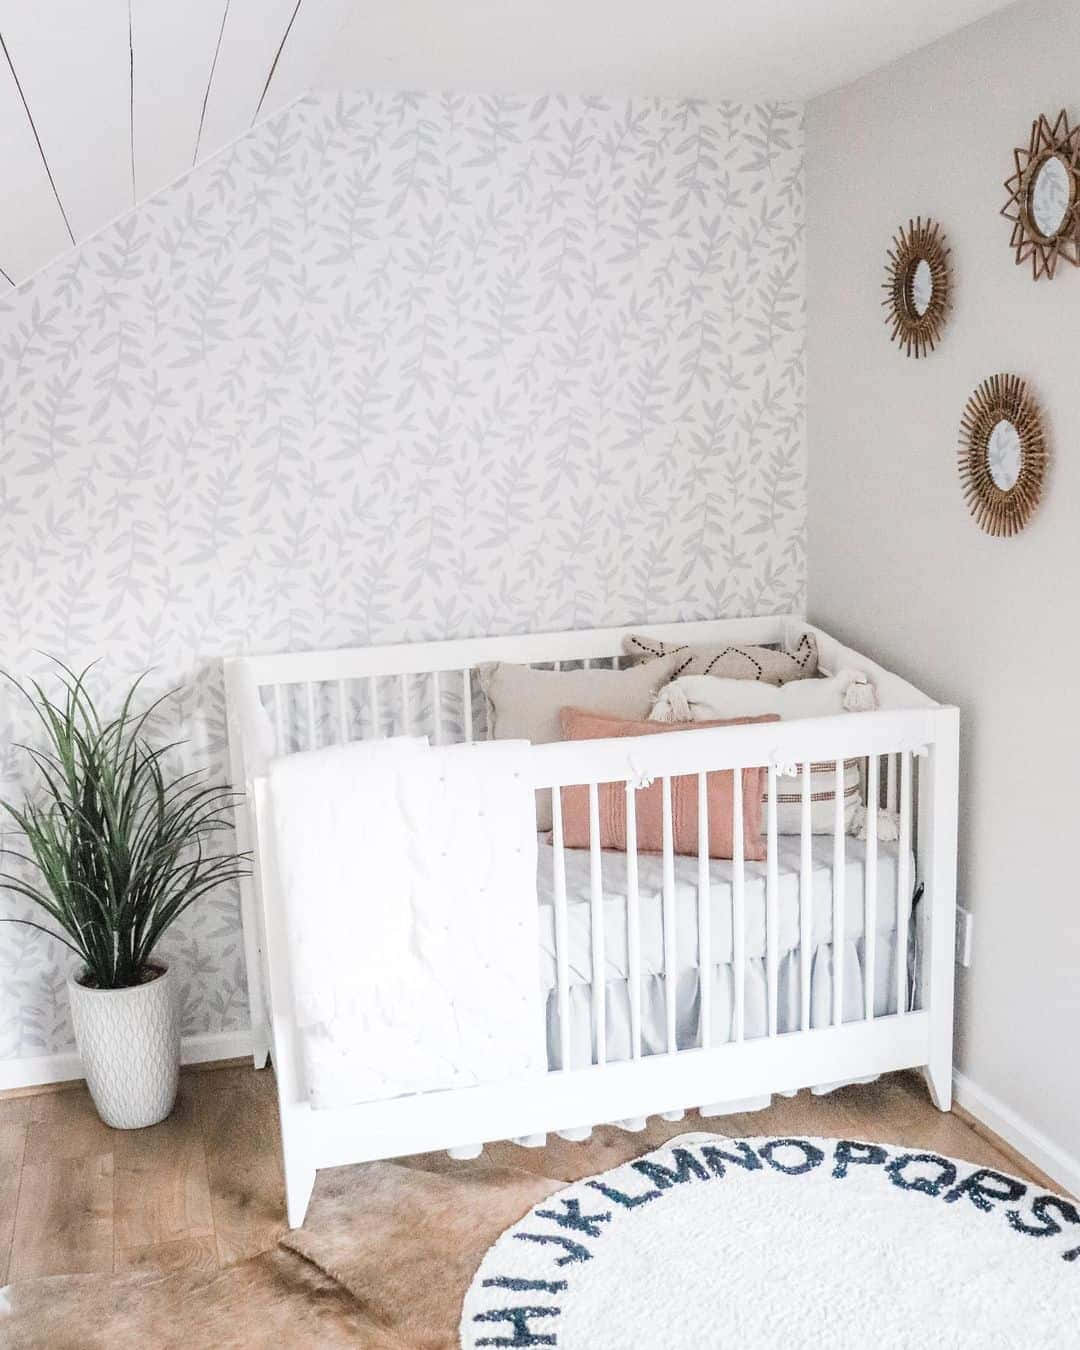 Walls Of A Baby Room With Subtle Designs Wallpaper